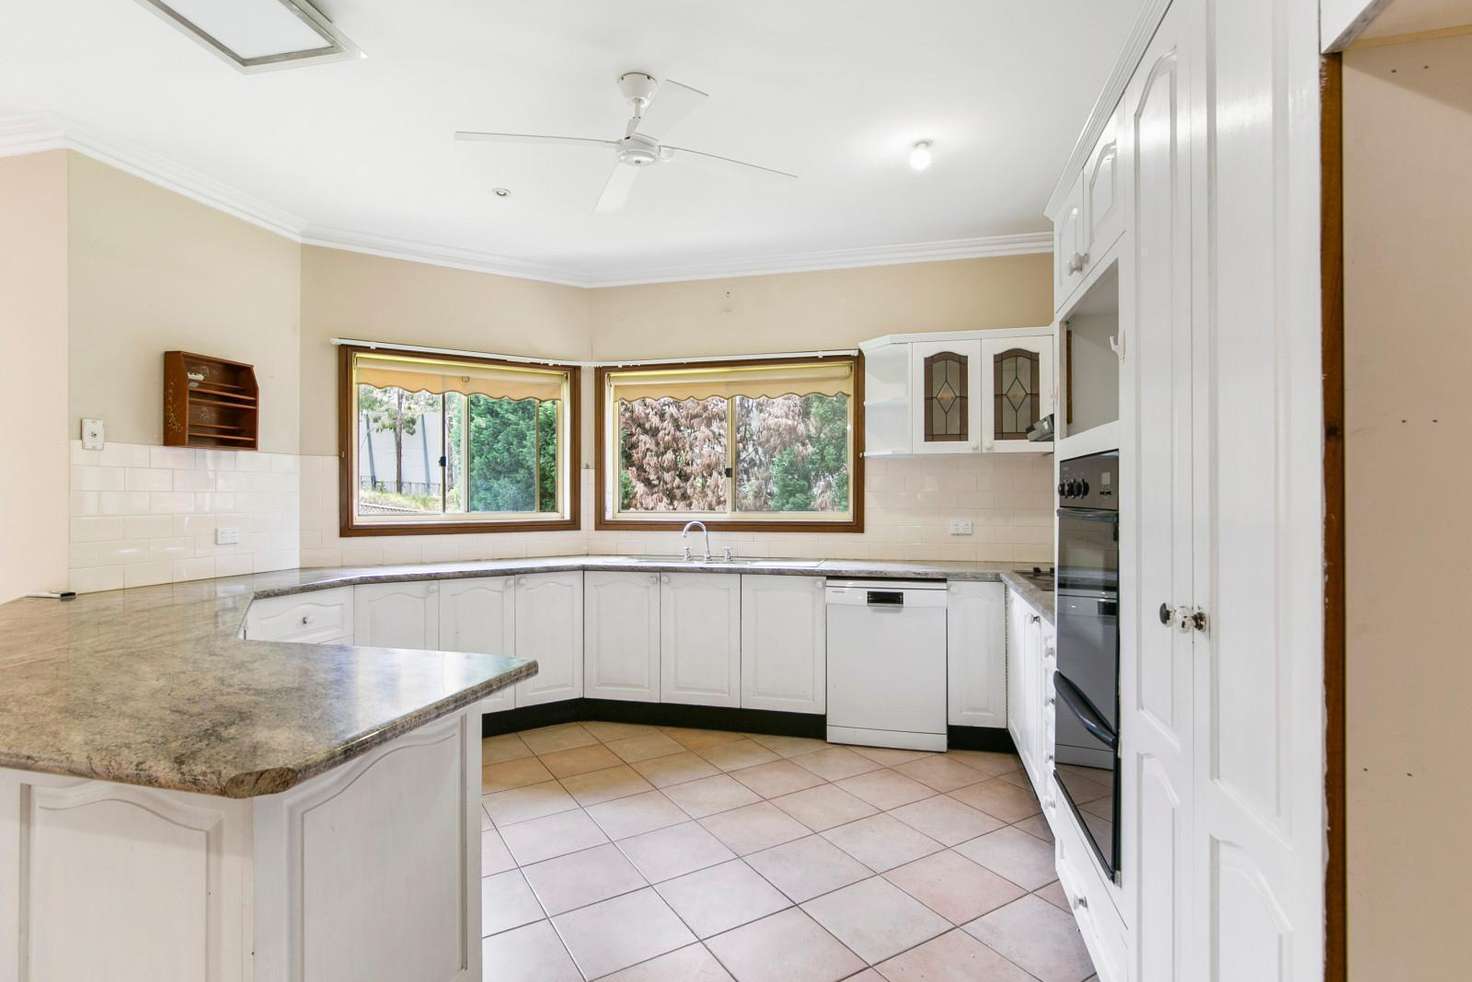 Main view of Homely house listing, 71 Valerie Avenue, Baulkham Hills NSW 2153